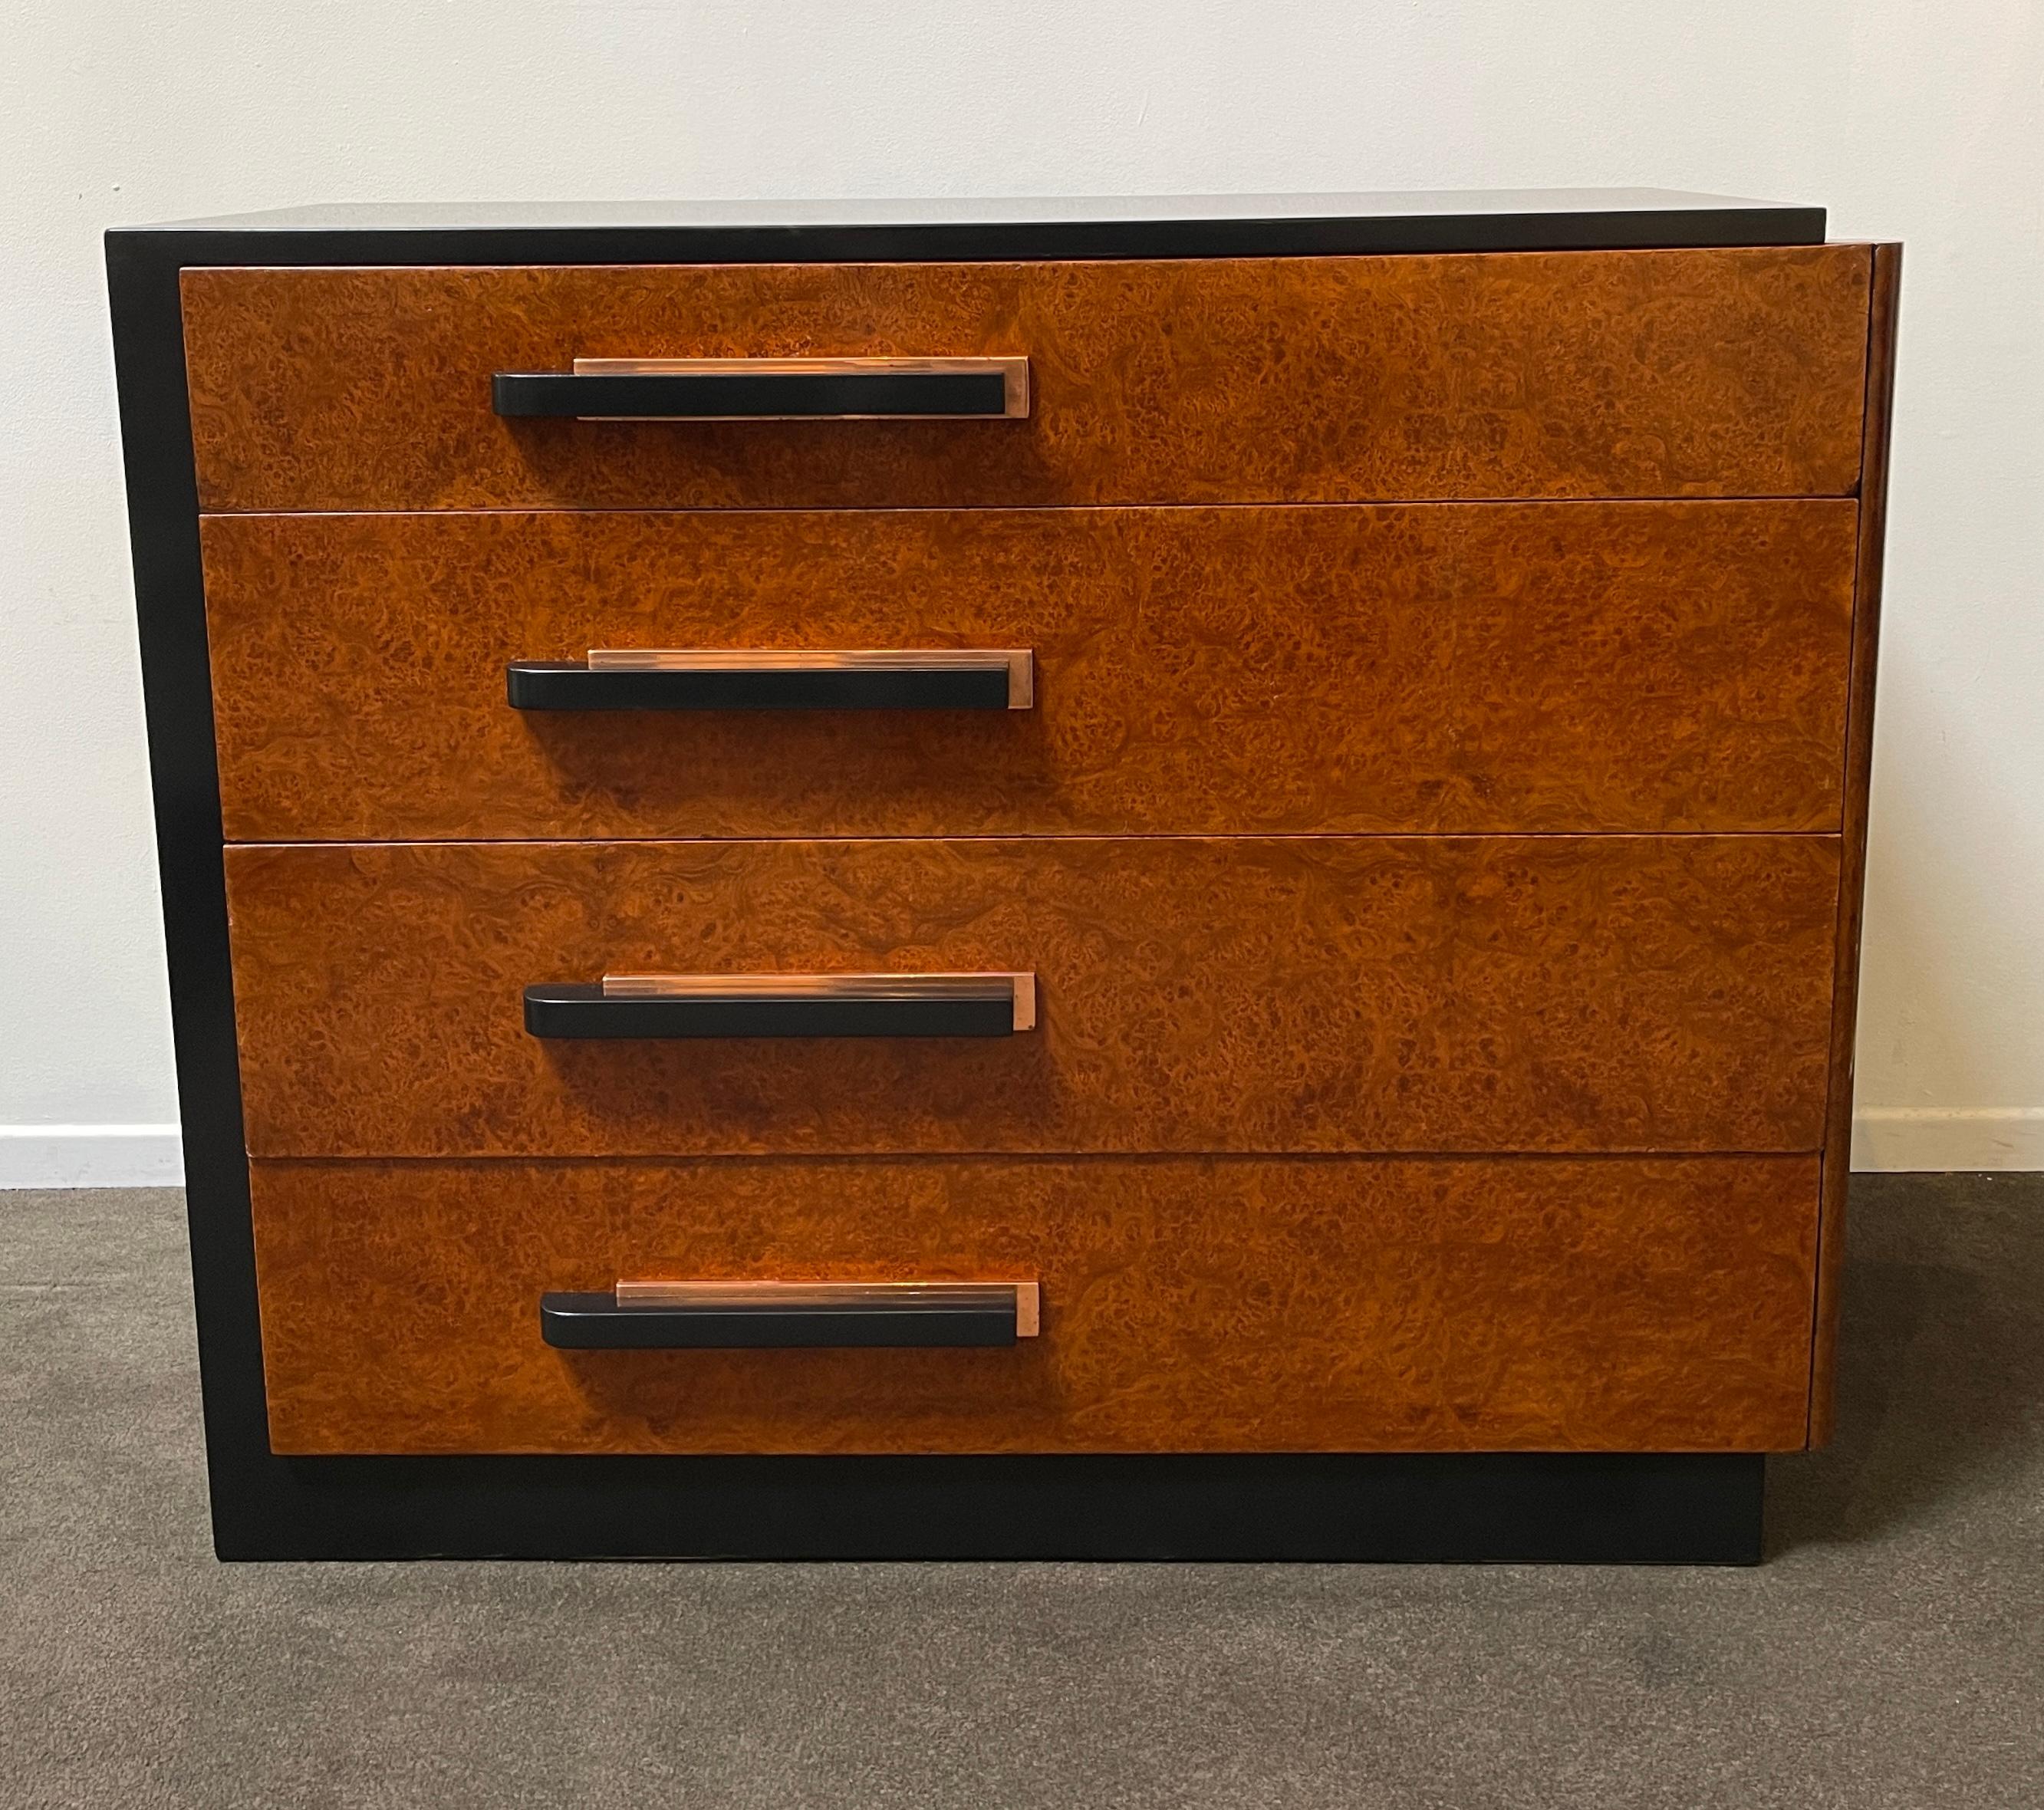 Beautiful and rare dresser designed by important art deco designer Donald Deskey for Widdicomb, circa 1935. This 4 drawer chest is in excellent condition. The finish has been expertly restored. The back plate of the handles are made with copper.